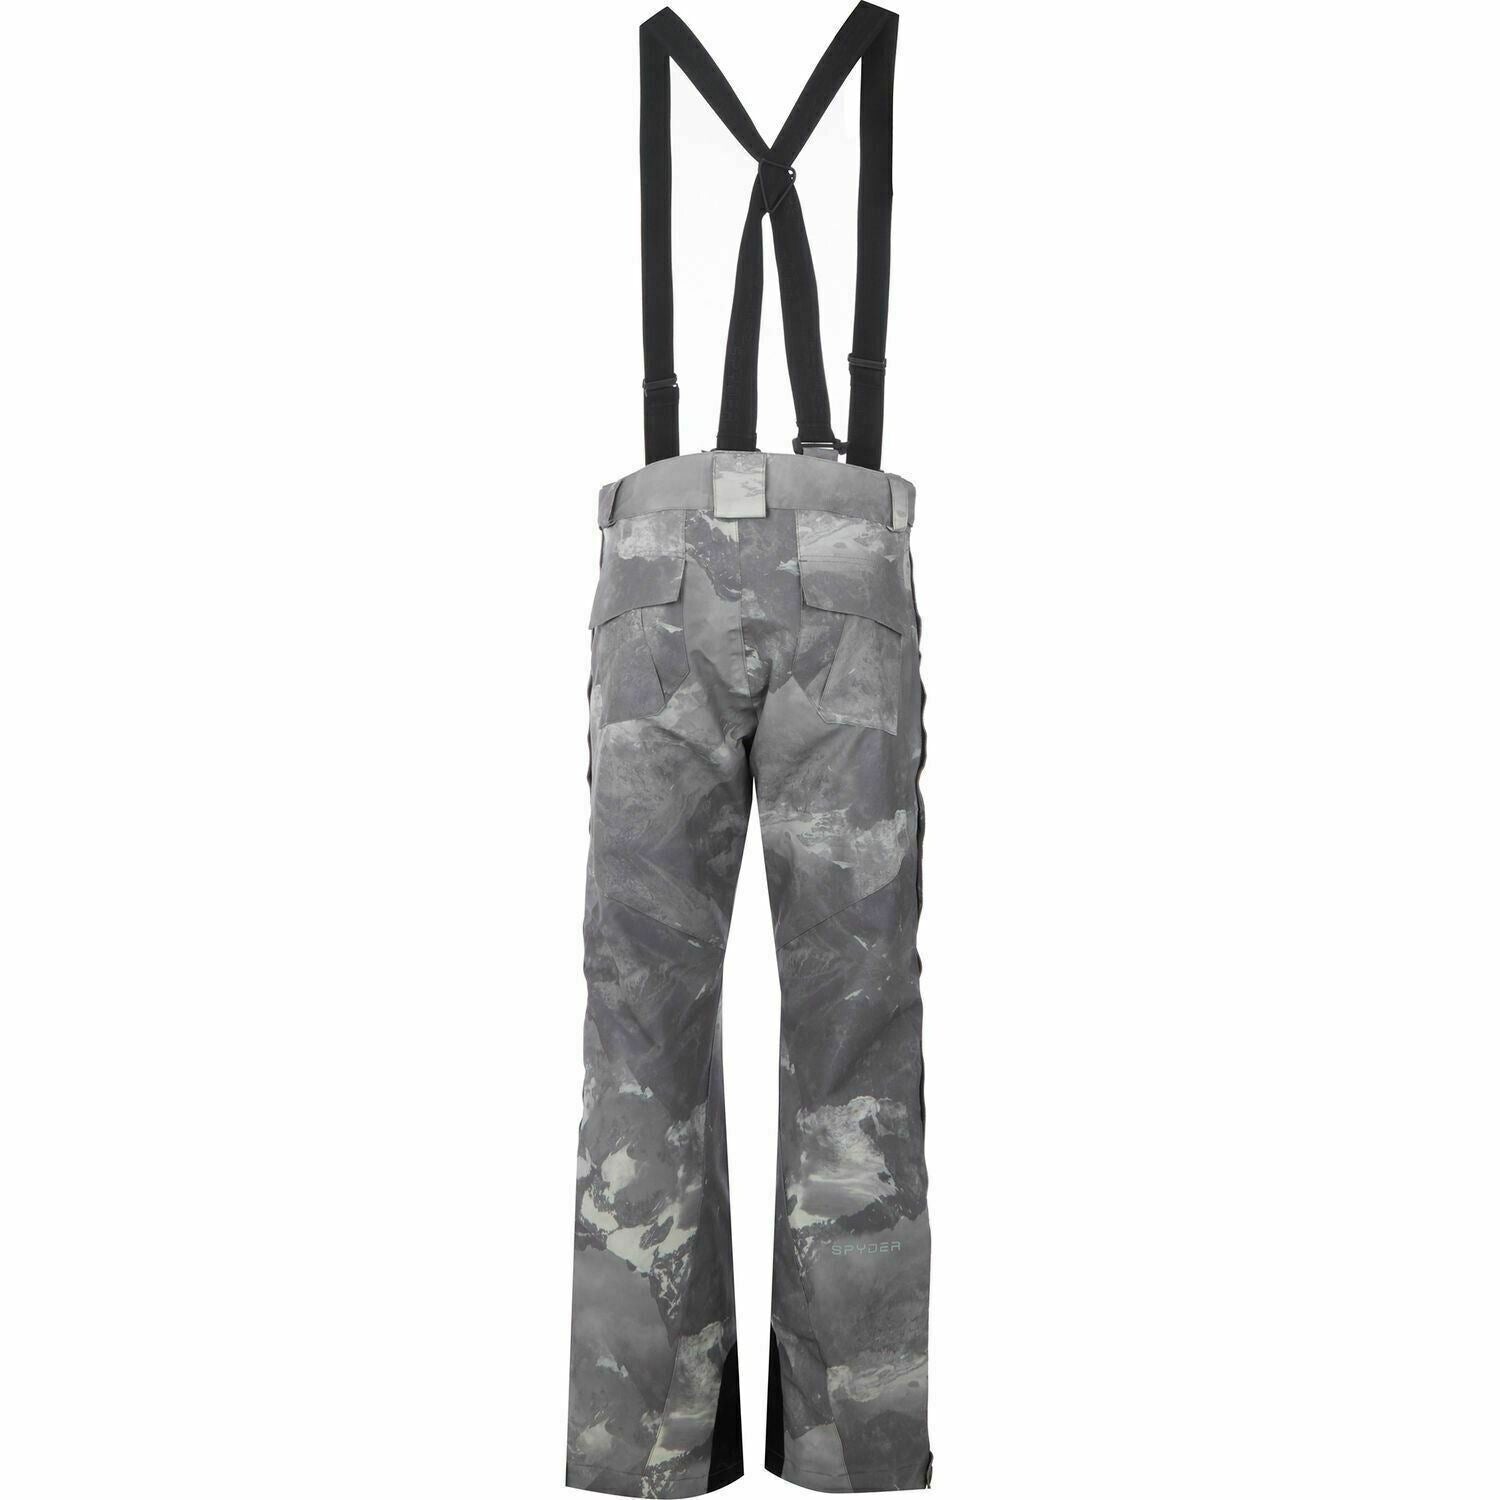 SPYDER Mens AXEL Full Side Zip Ski Trousers Pants, Grey Camouflage, size S